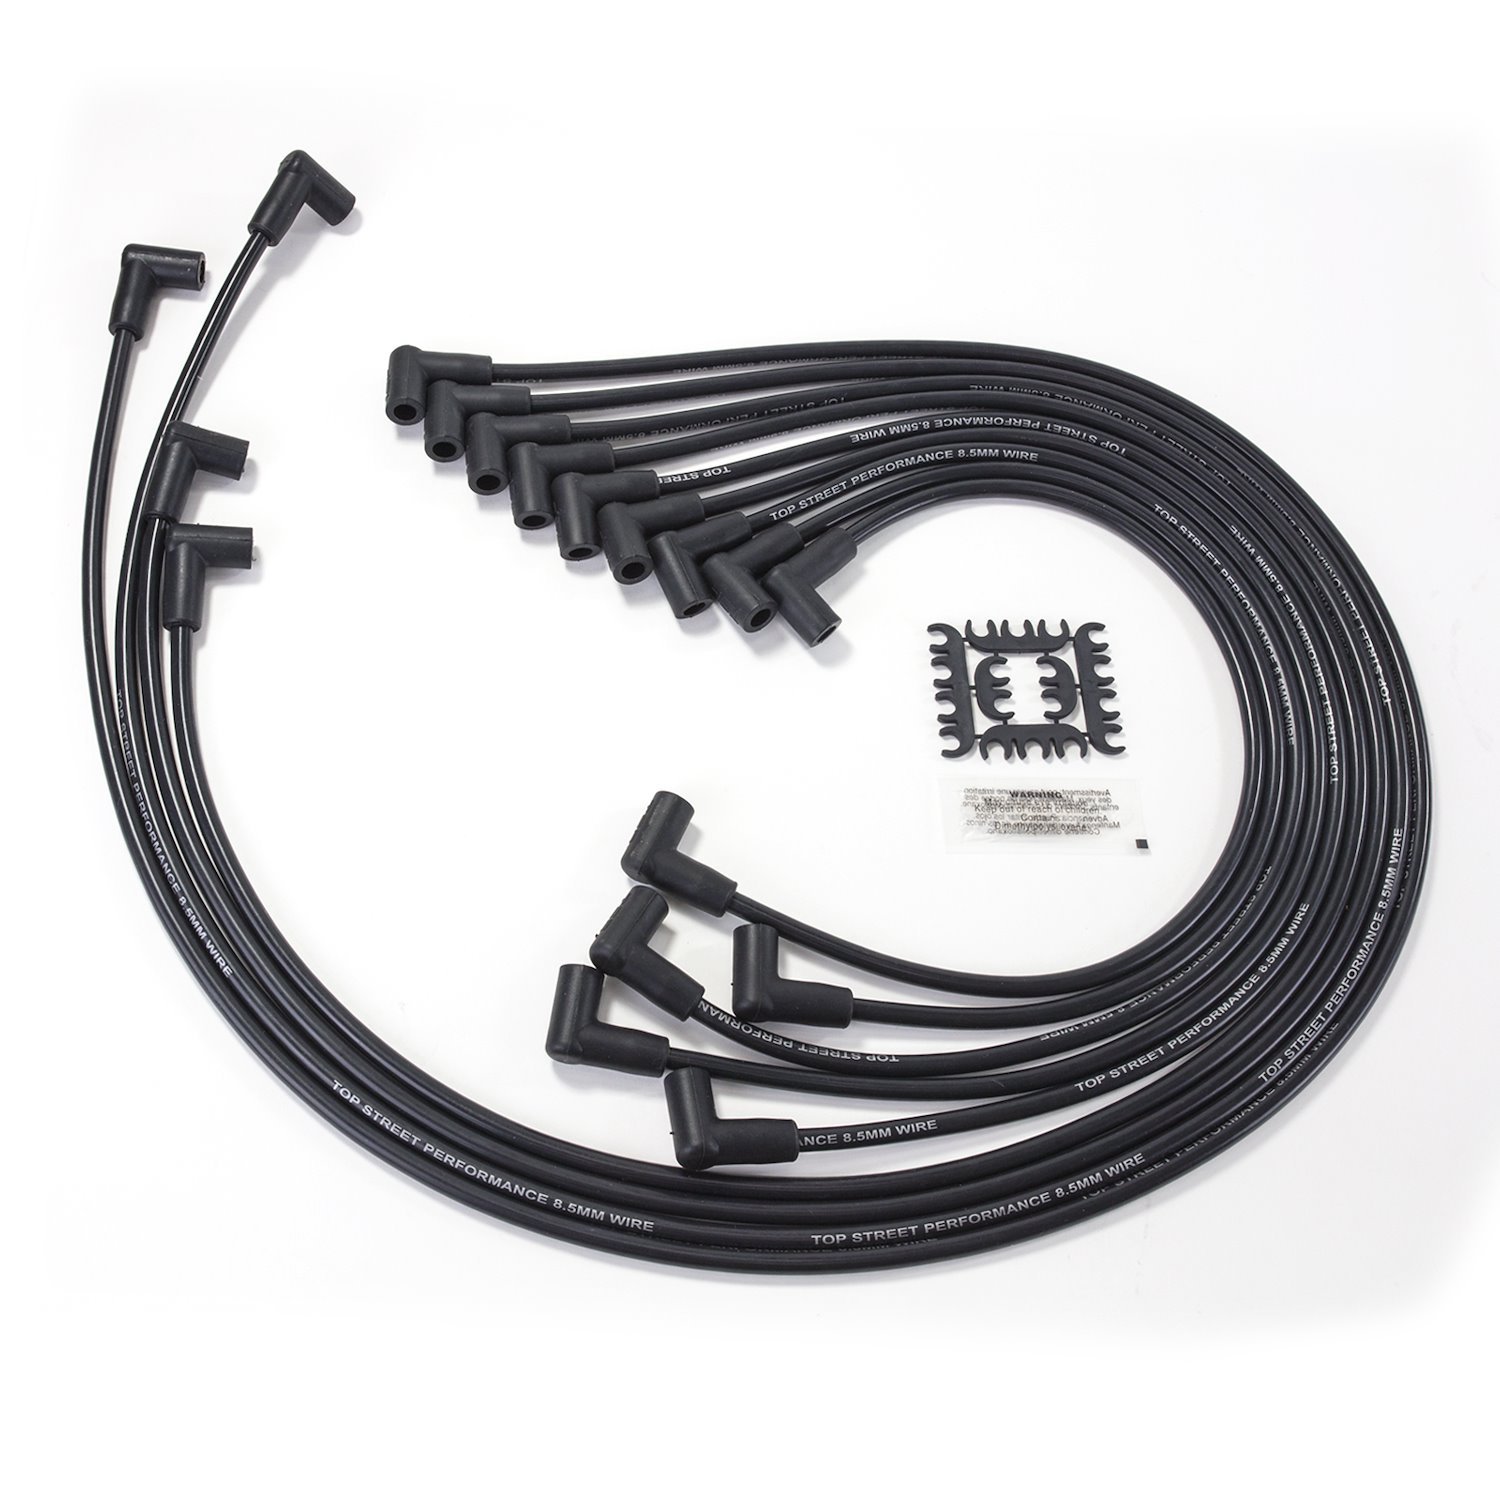 82090 Chevy Small Block Ignition Wires, 8.5mm Black, 90-Degrees Plug Boots